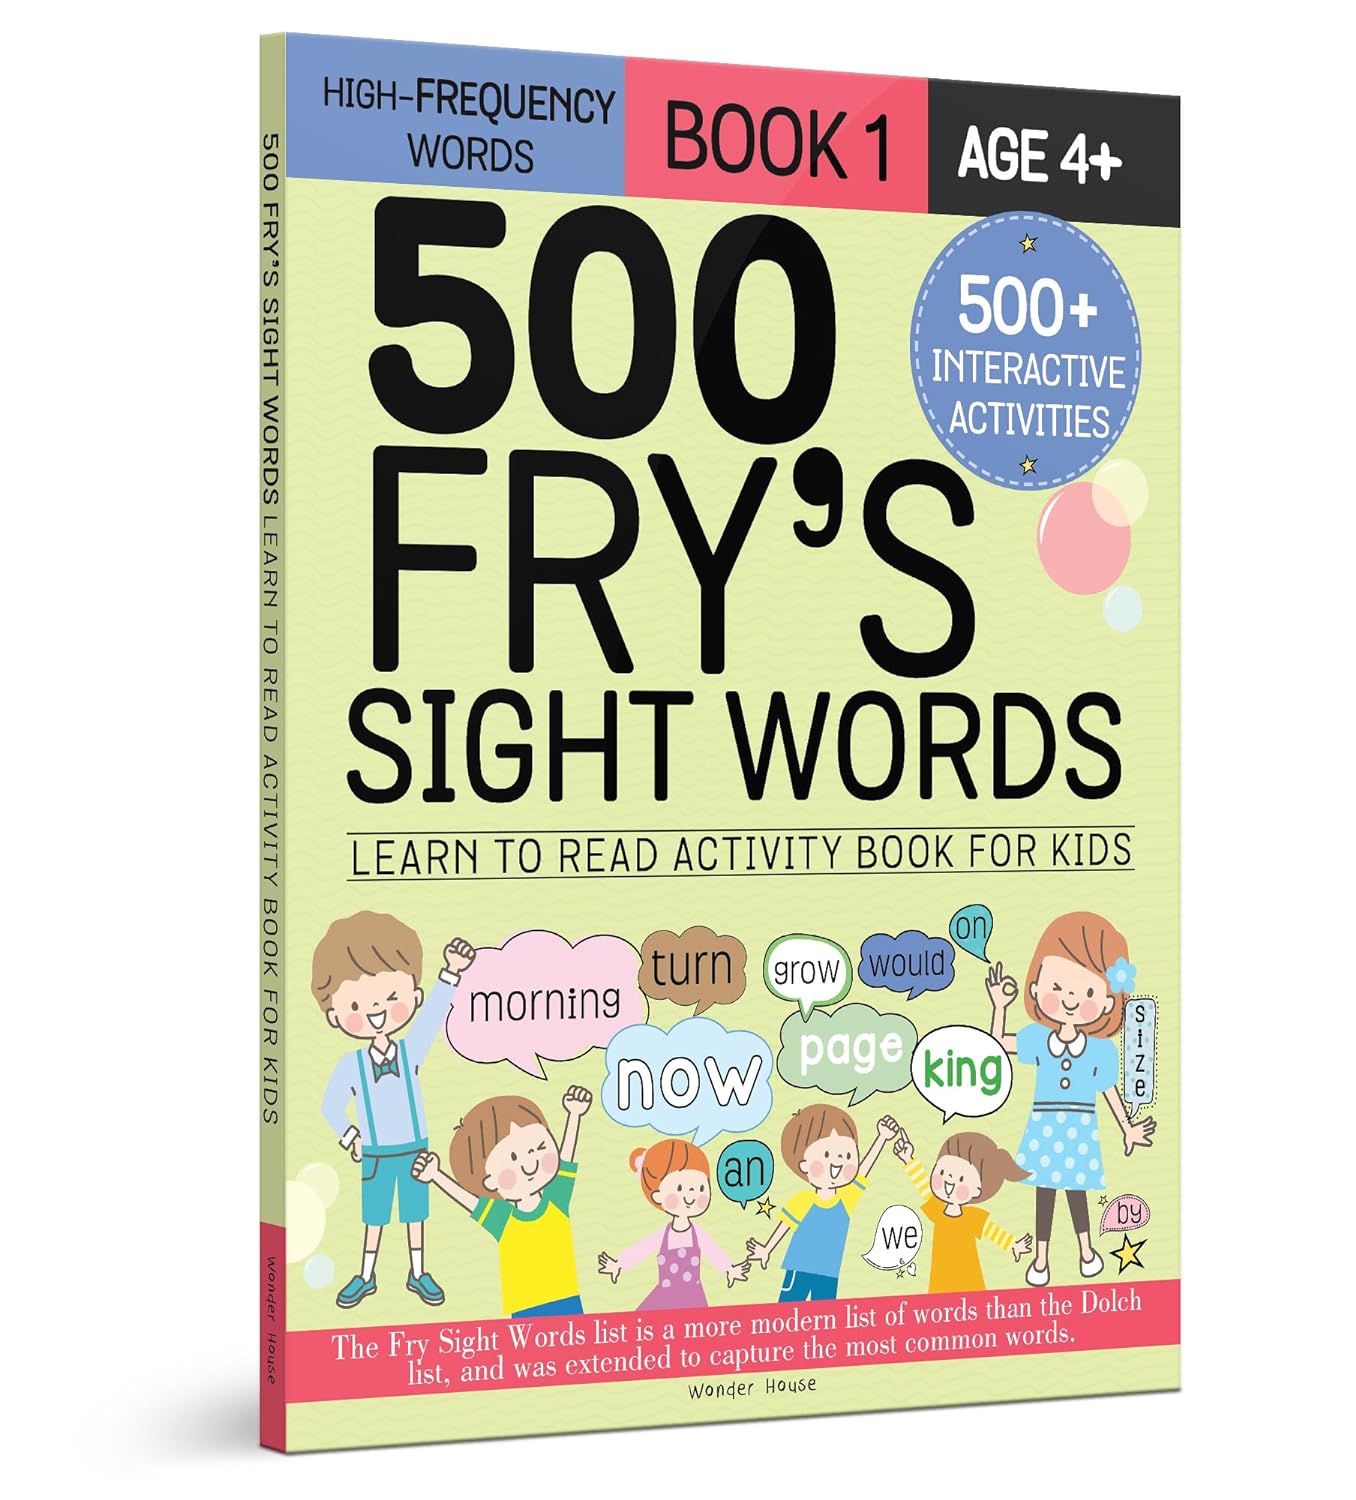 500 Fry's Sight Words: Learn to Read Activity Book for Kids